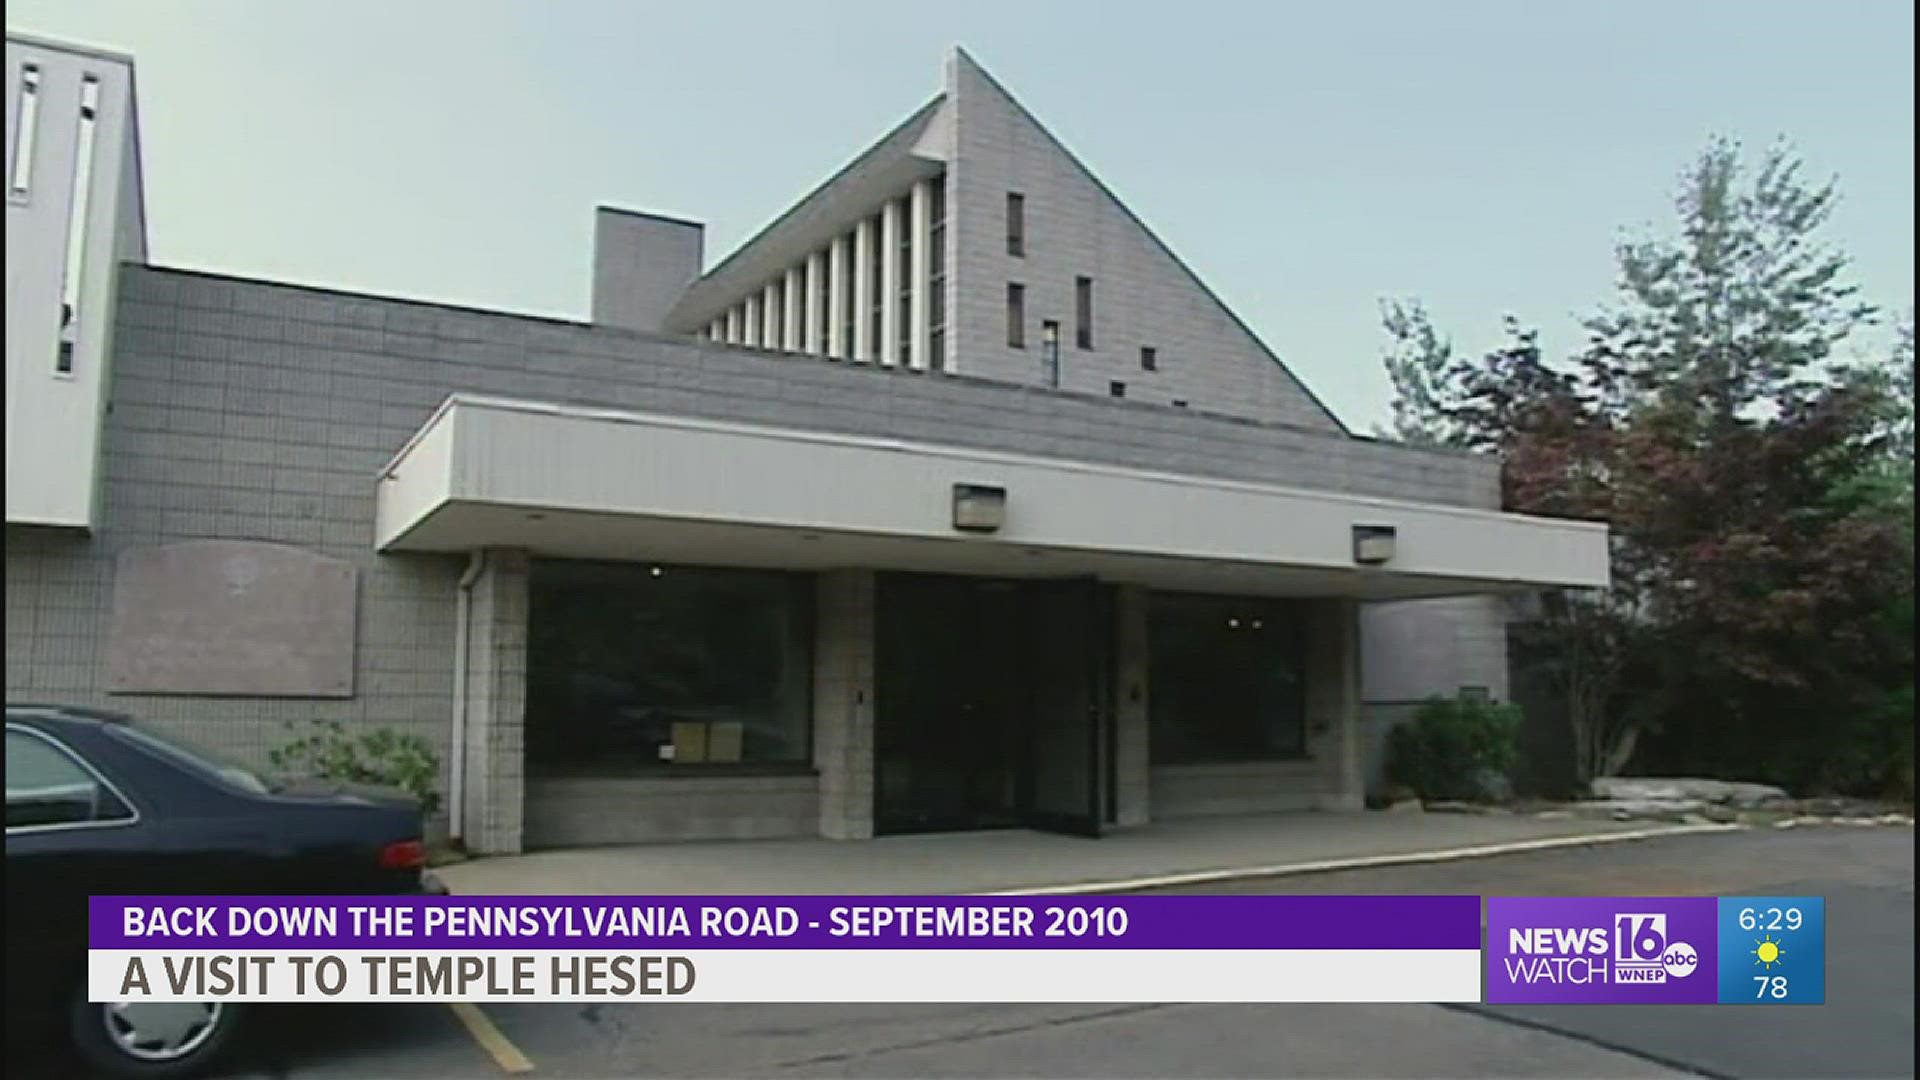 Temple Hesed in Scranton traces its beginnings back more than 150 years.